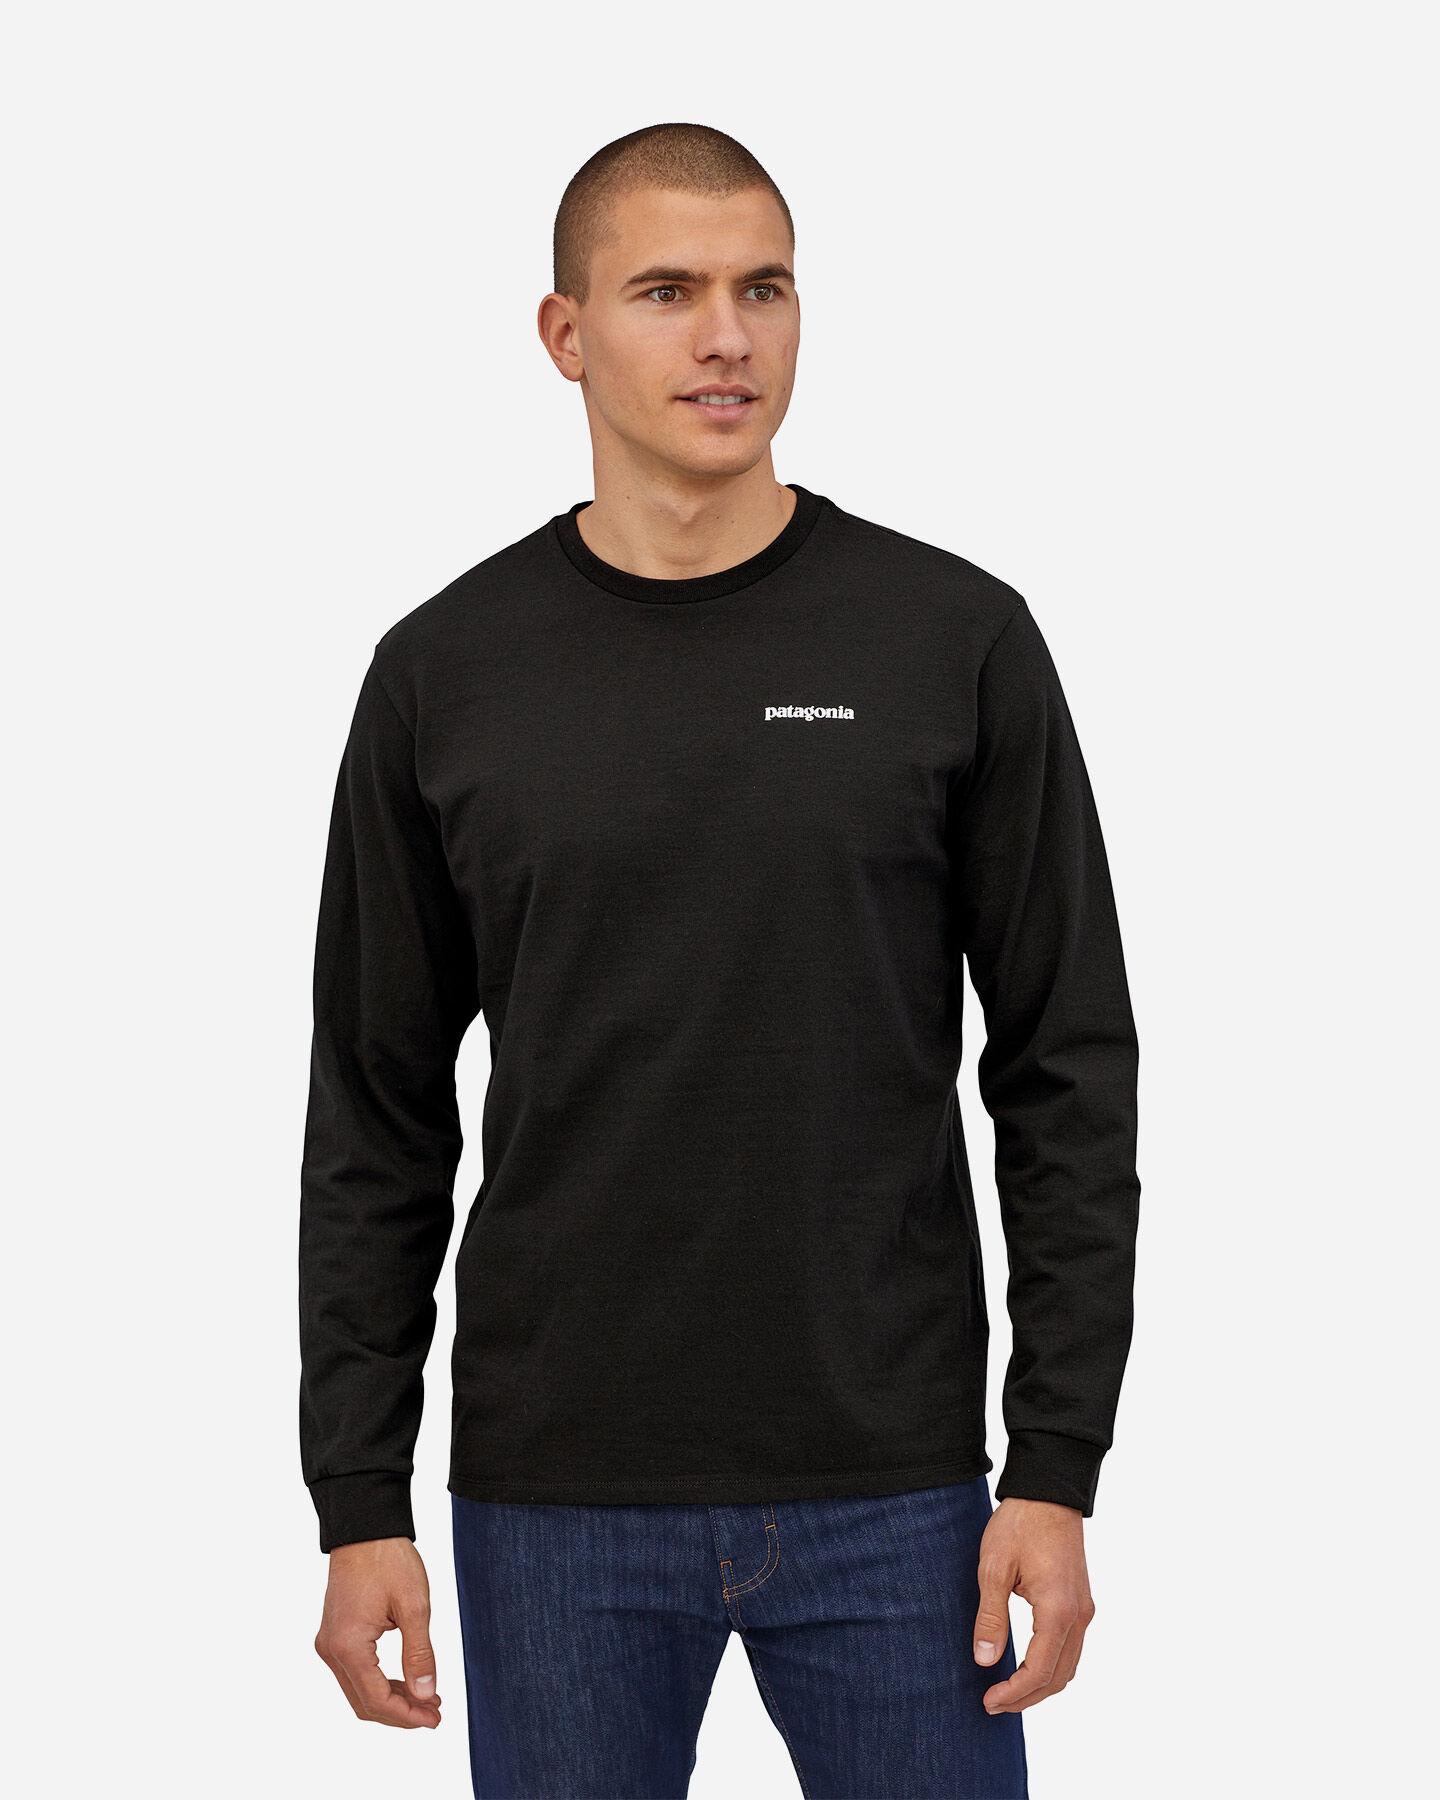  T-Shirt PATAGONIA P-6 LOGO M S4089229|BLK|M scatto 0